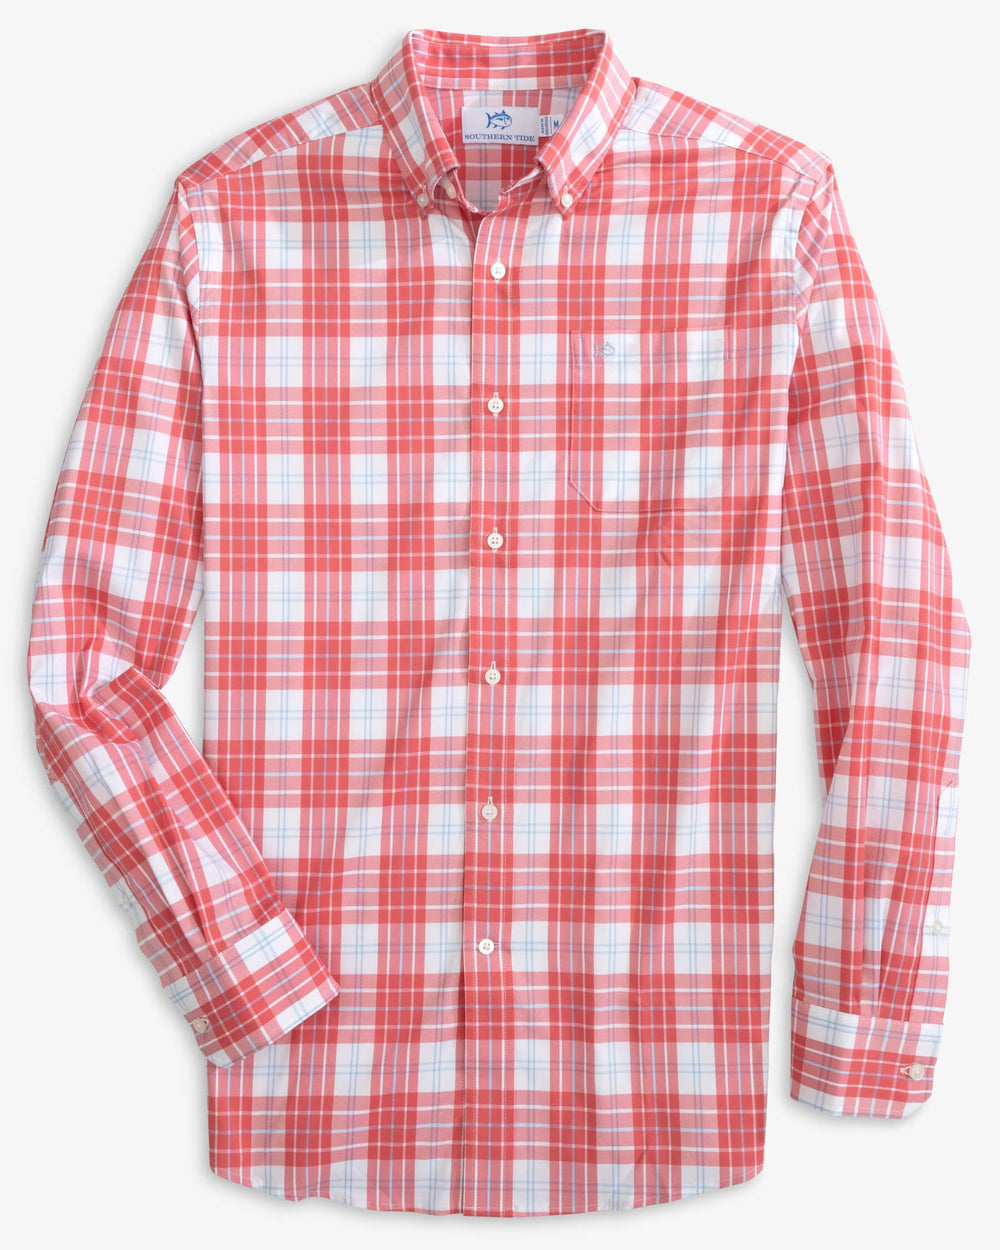 The front view of the Southern Tide Seaglade Plaid Heather Intercoastal Long Sleeve Button Down Sport Shirt by Southern Tide - Rosewood Red